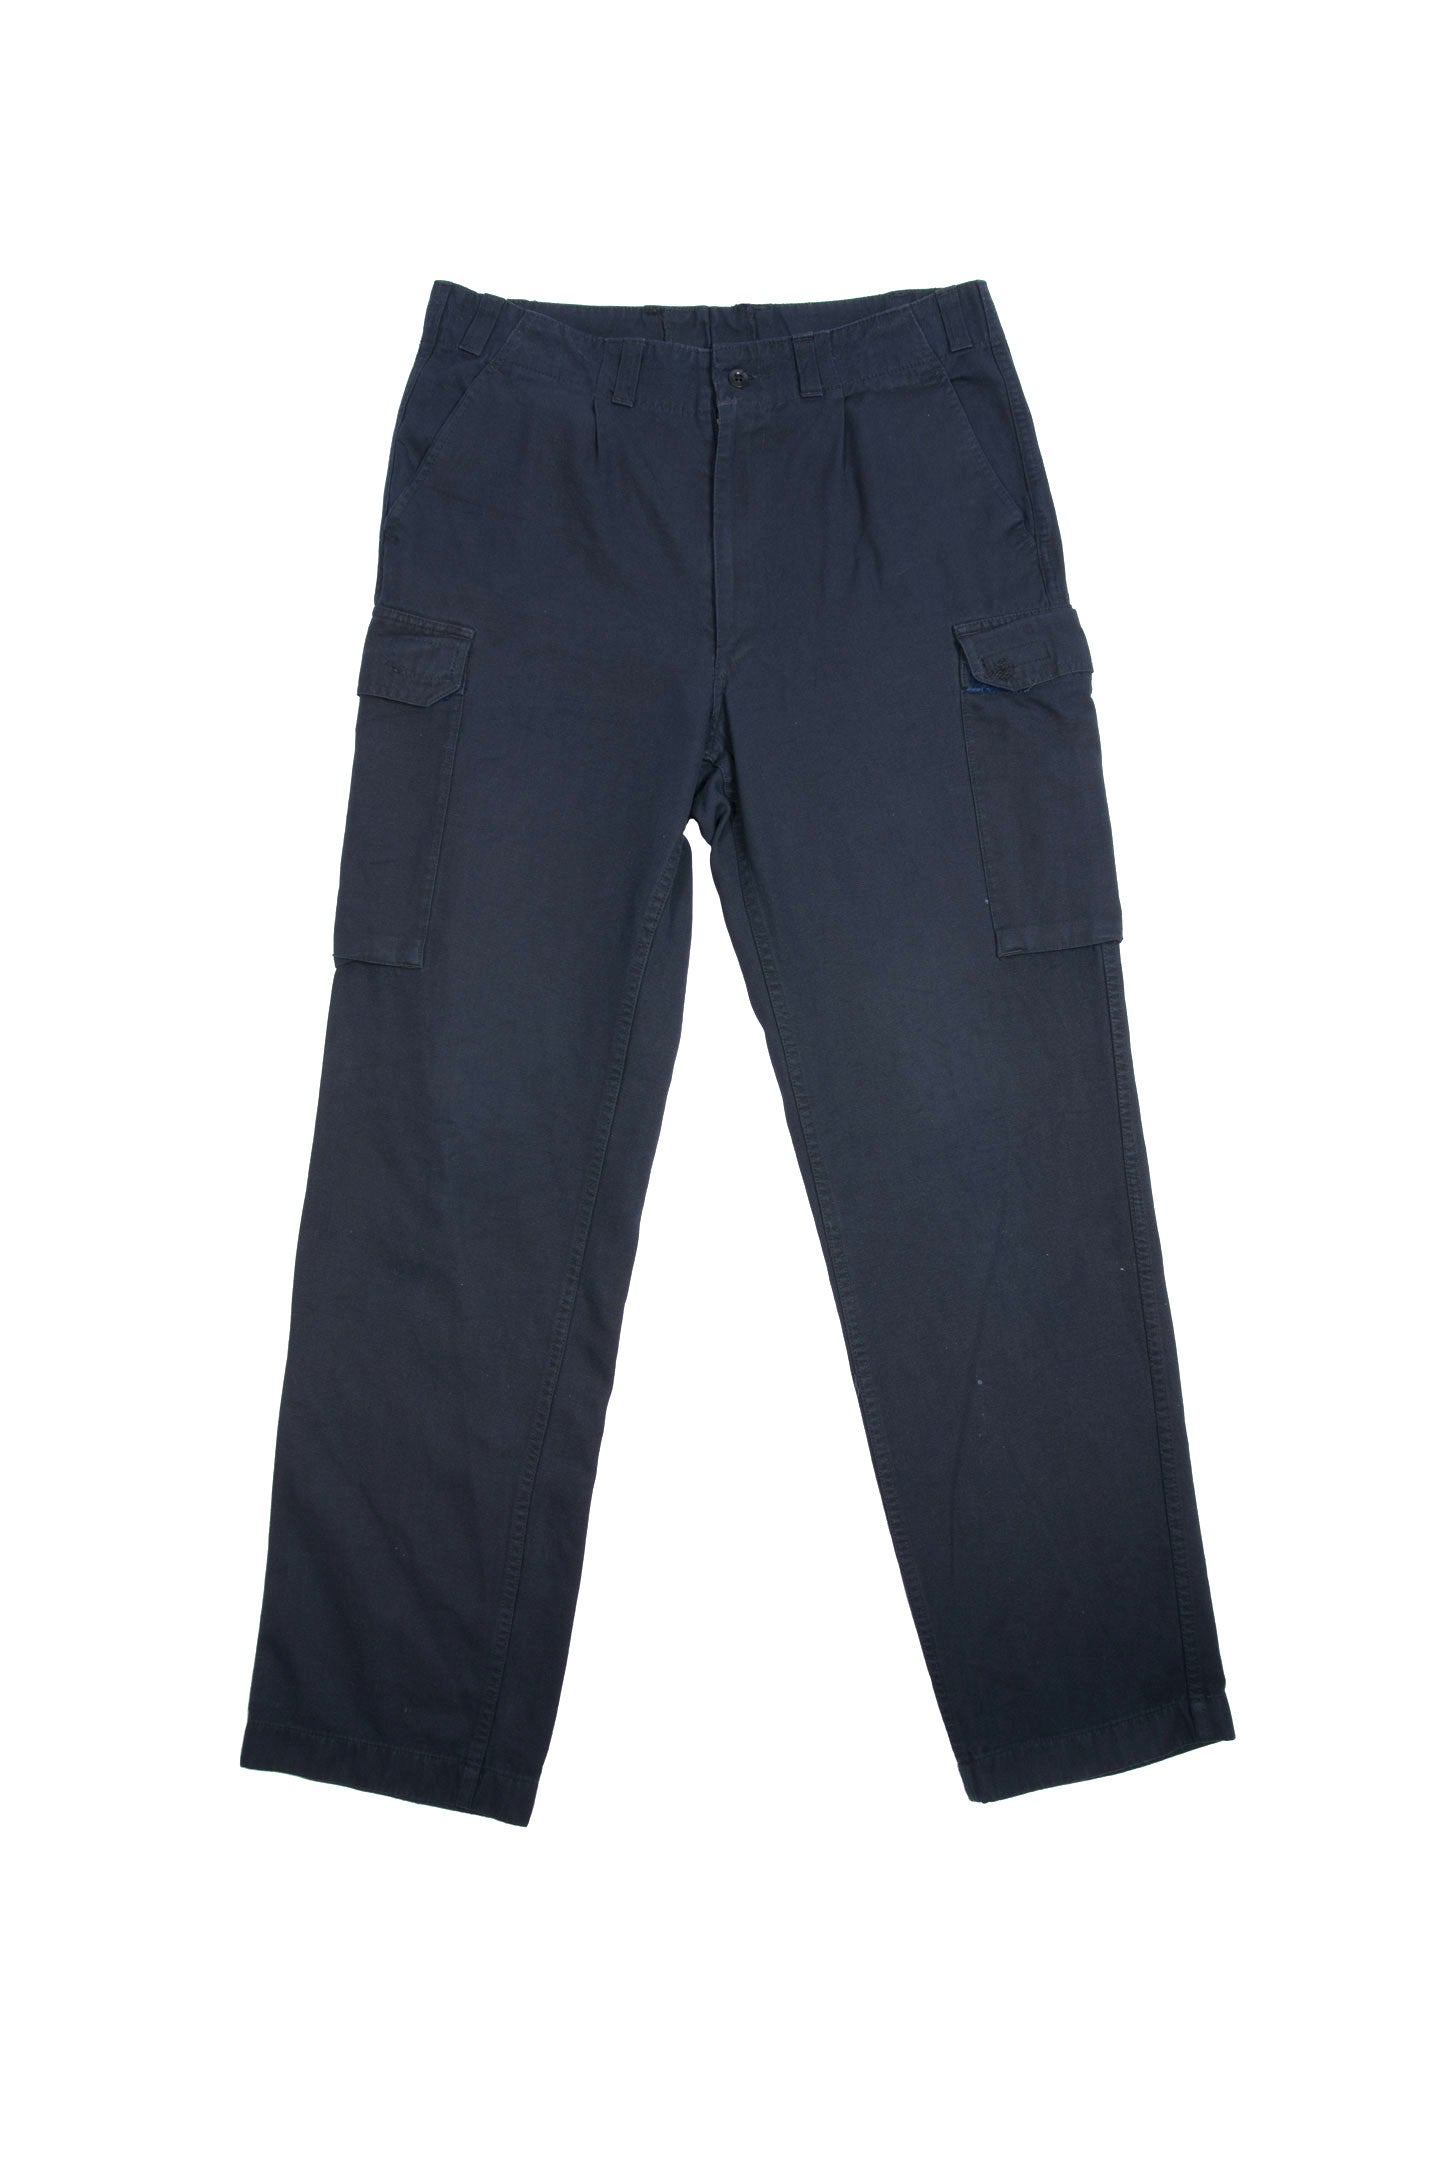 USED CARGO PANTS NAVY BLUE